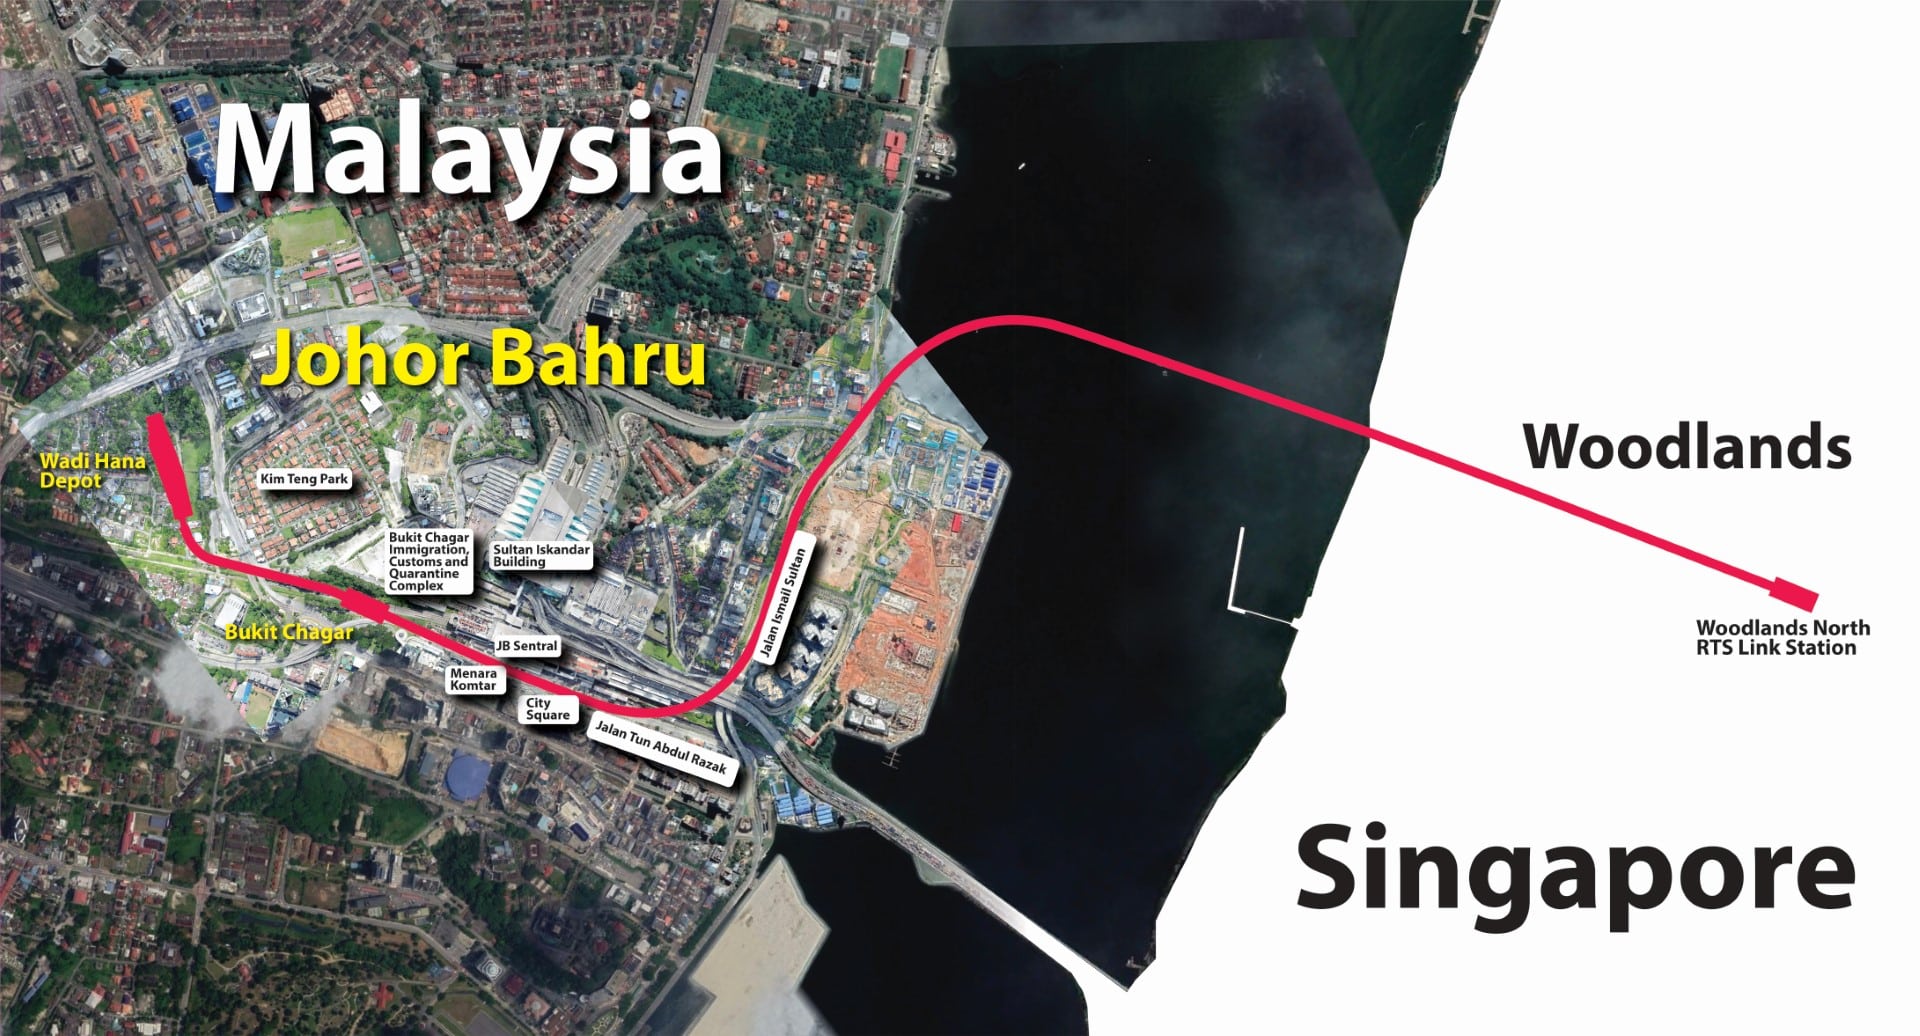 Johor Bahru-Singapore RTS Link project is on schedule